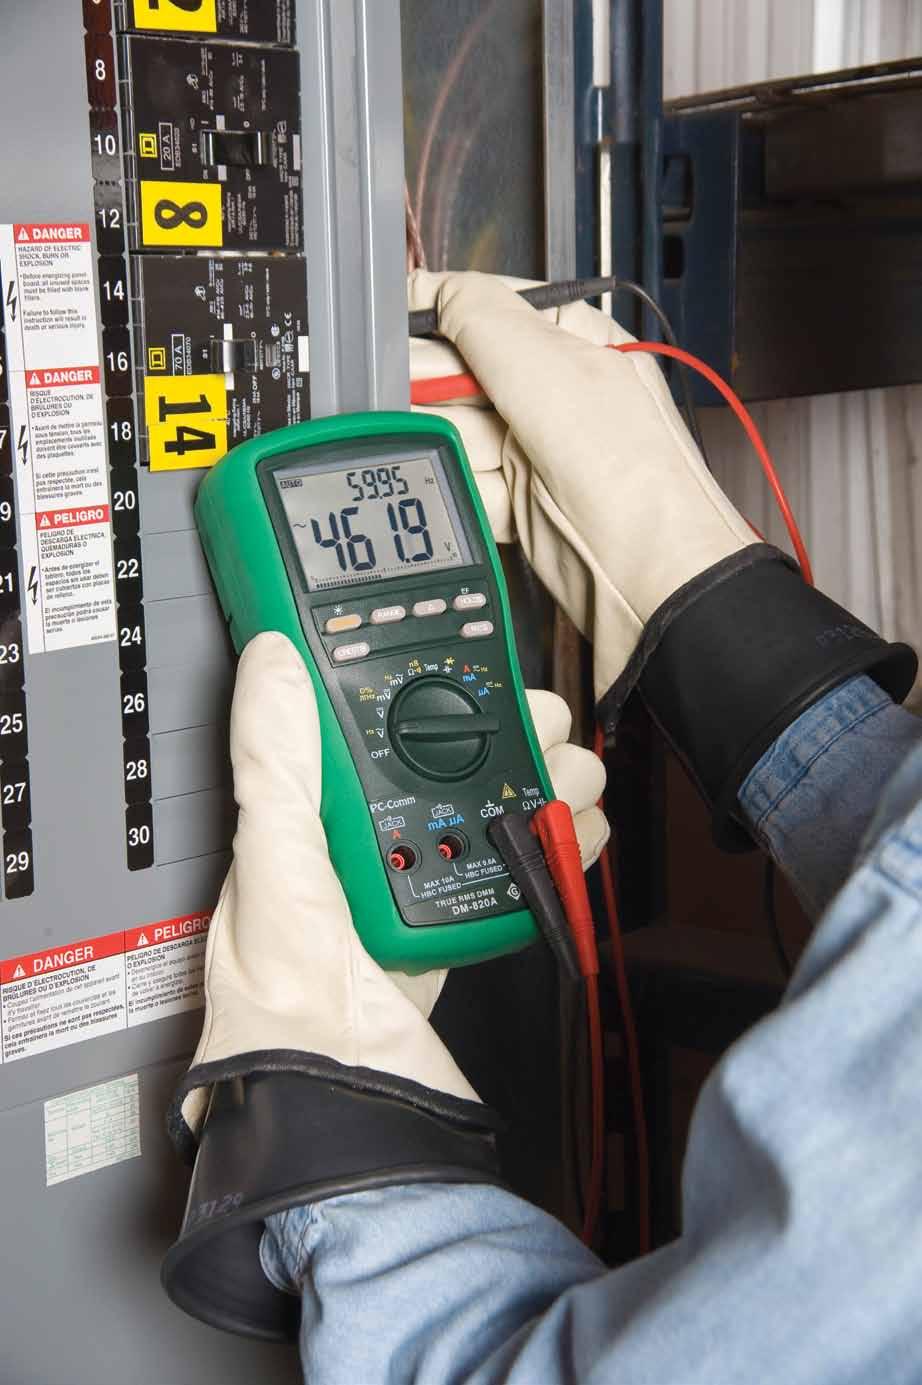 Greenlee is the leader in electrical testing and